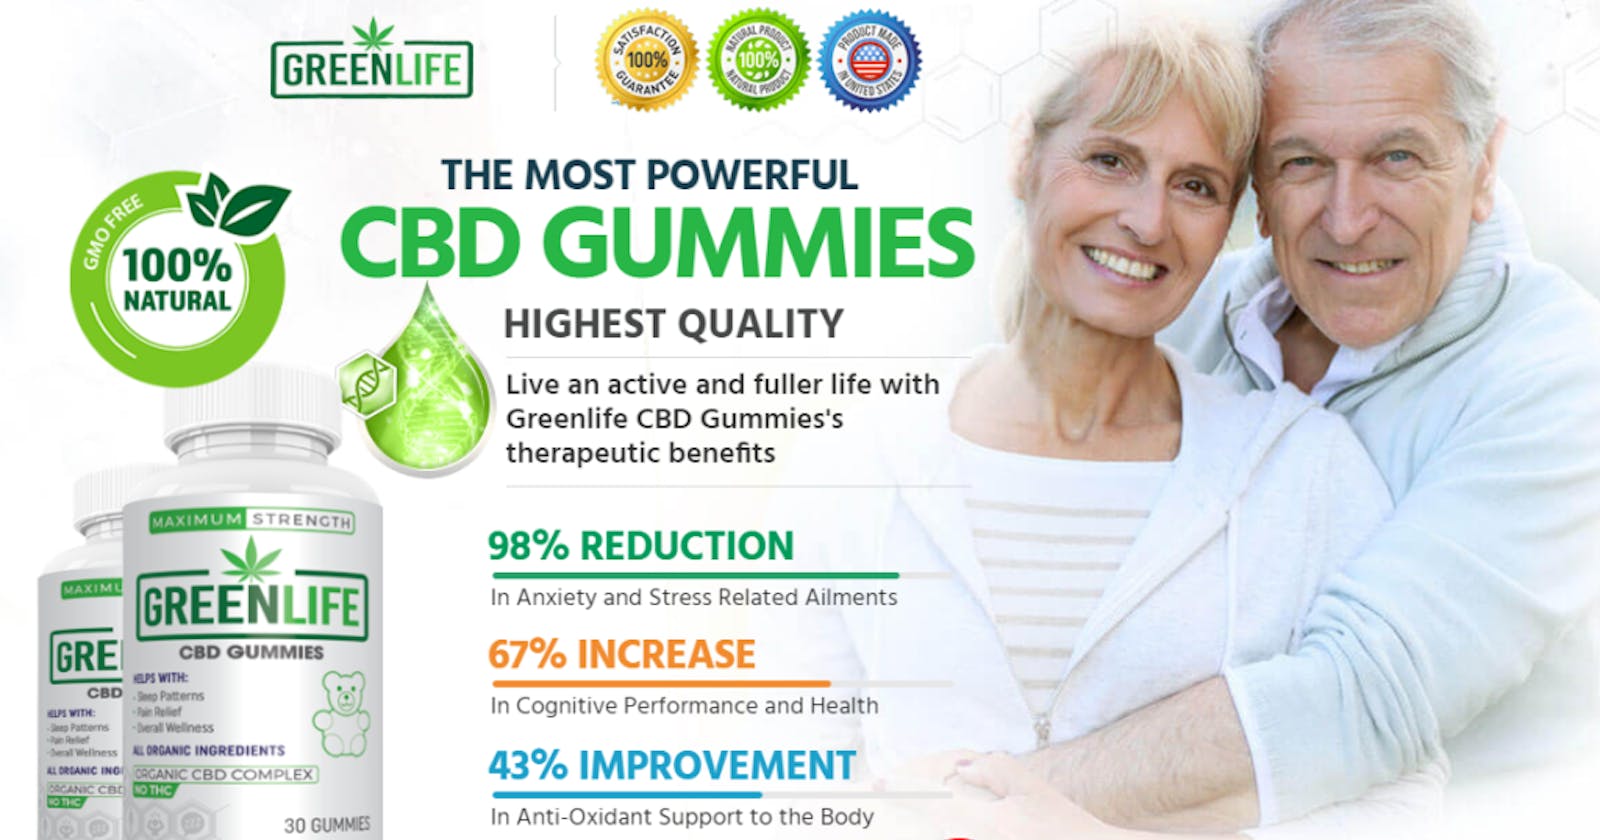 GreenLife CBD Gummies Reviews SHOCKING Report Know The Side Effects And Ingredients Used In CBD Gummies Trustworthy Brand or Cheap CBD Gummy?